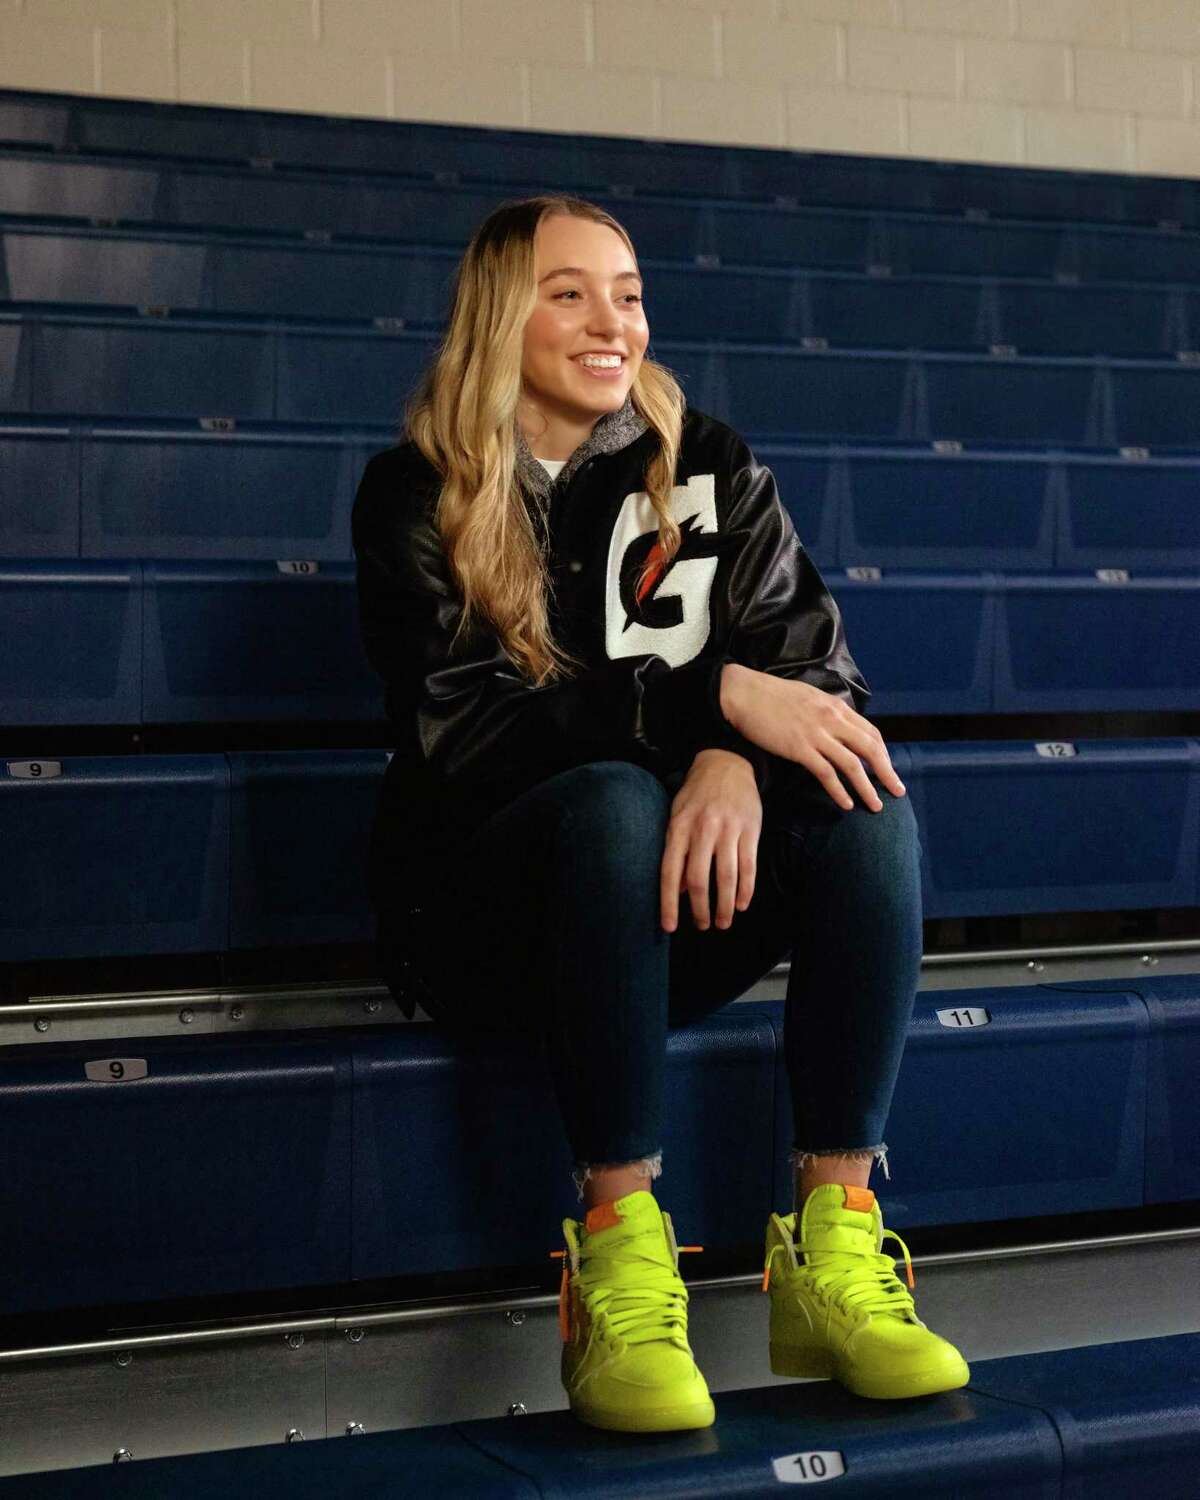 UConn's Paige Bueckers has signed an endorsement deal with Gatorade.